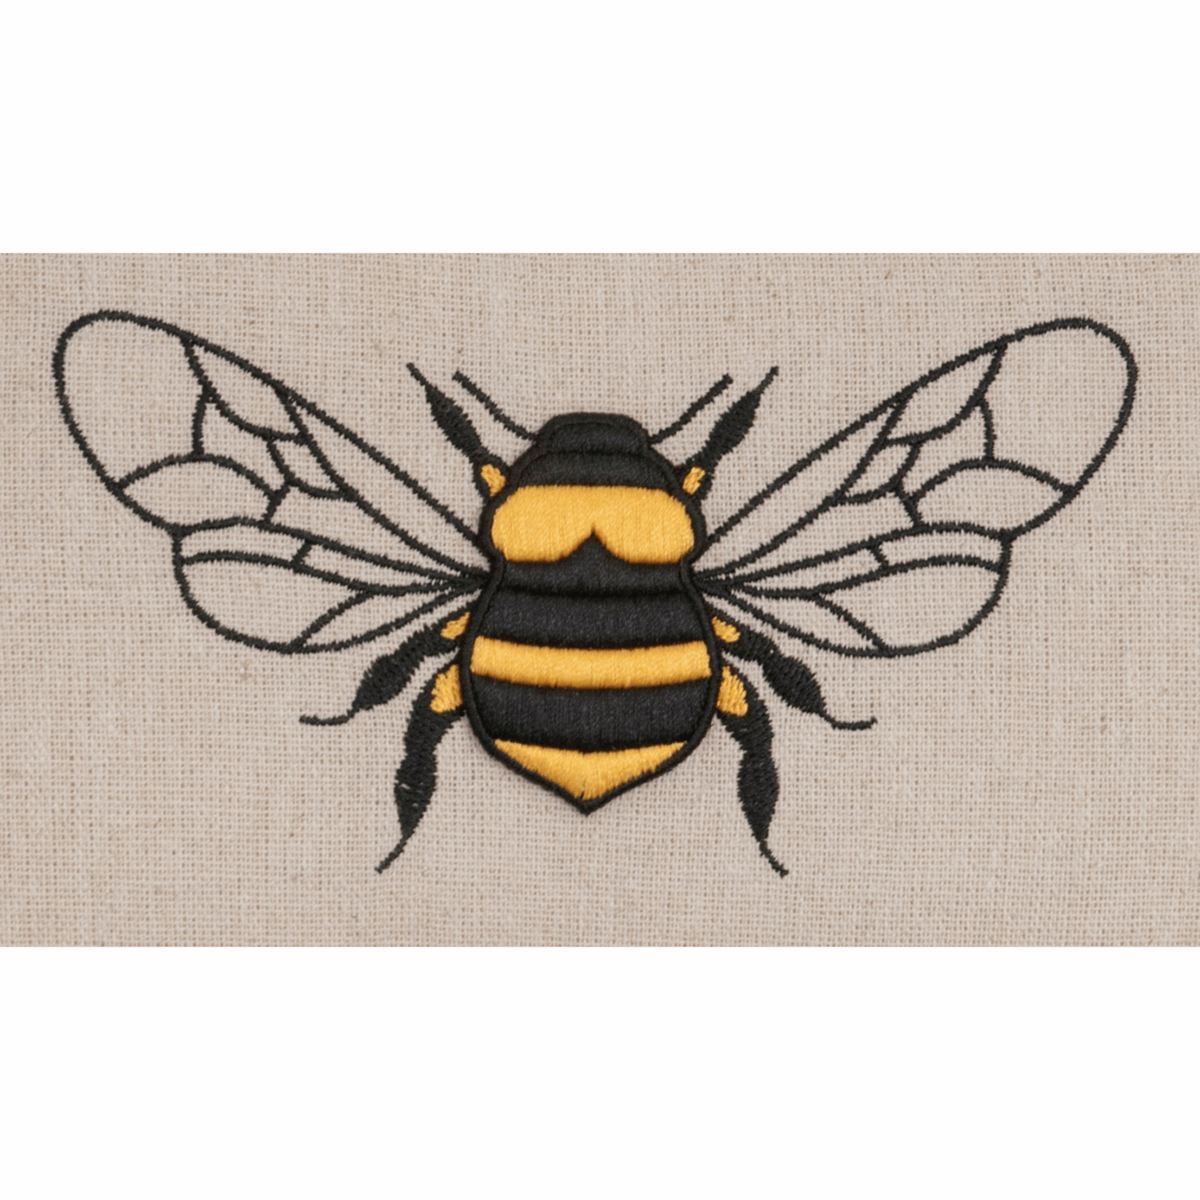 Bee Hive Linen Woven Sewing Box - Small